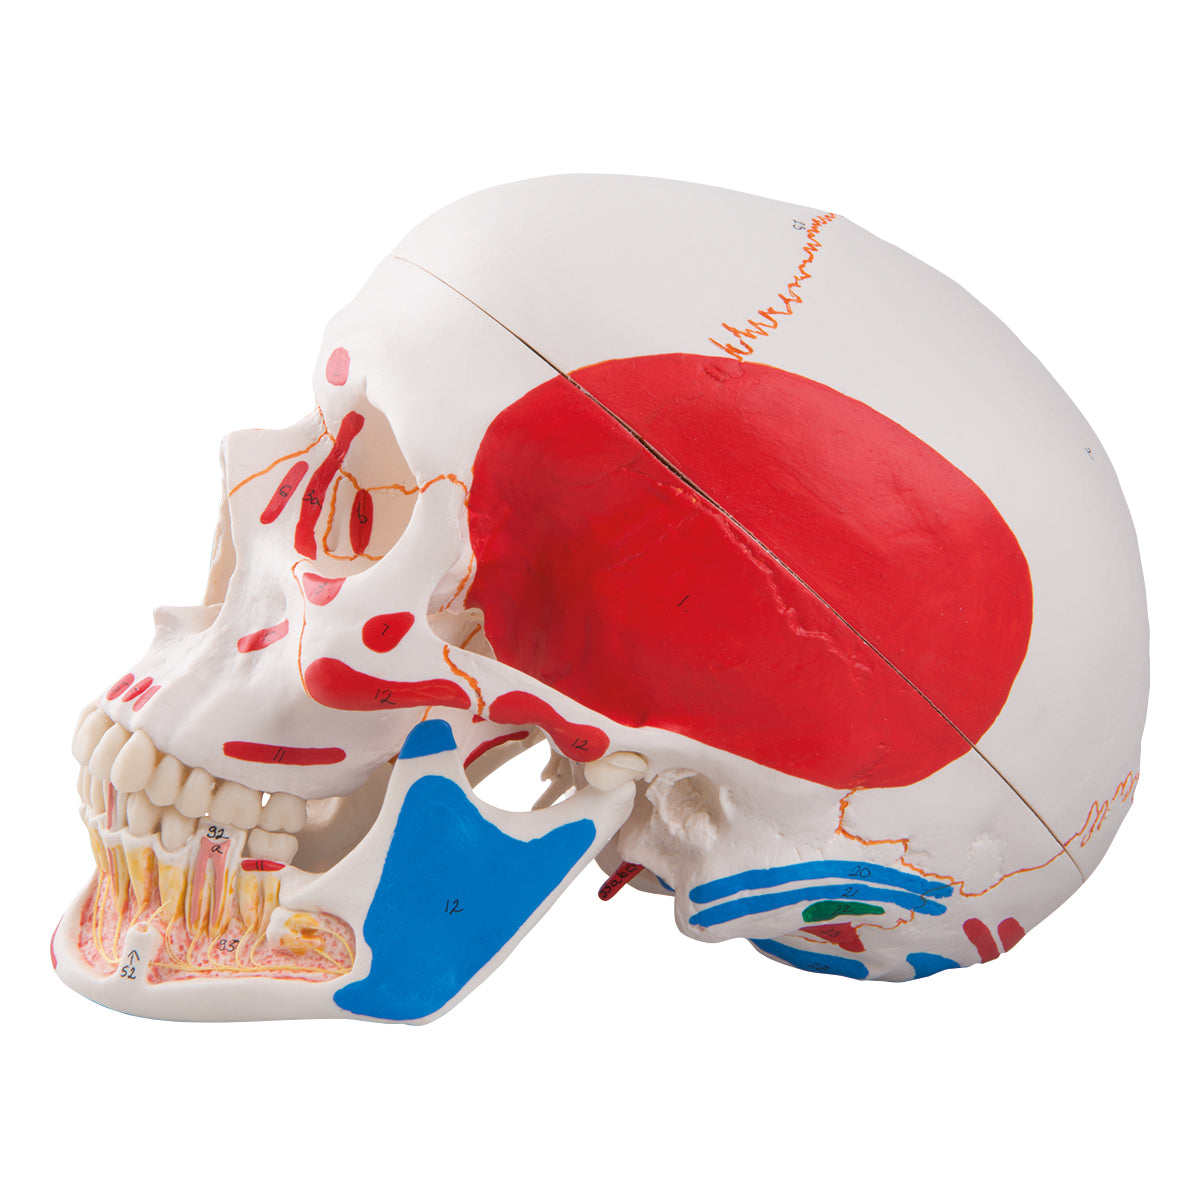 Skull model showing blood vessels and nerves in the lower jaw as well as colored muscle indications. Can be divided into 3